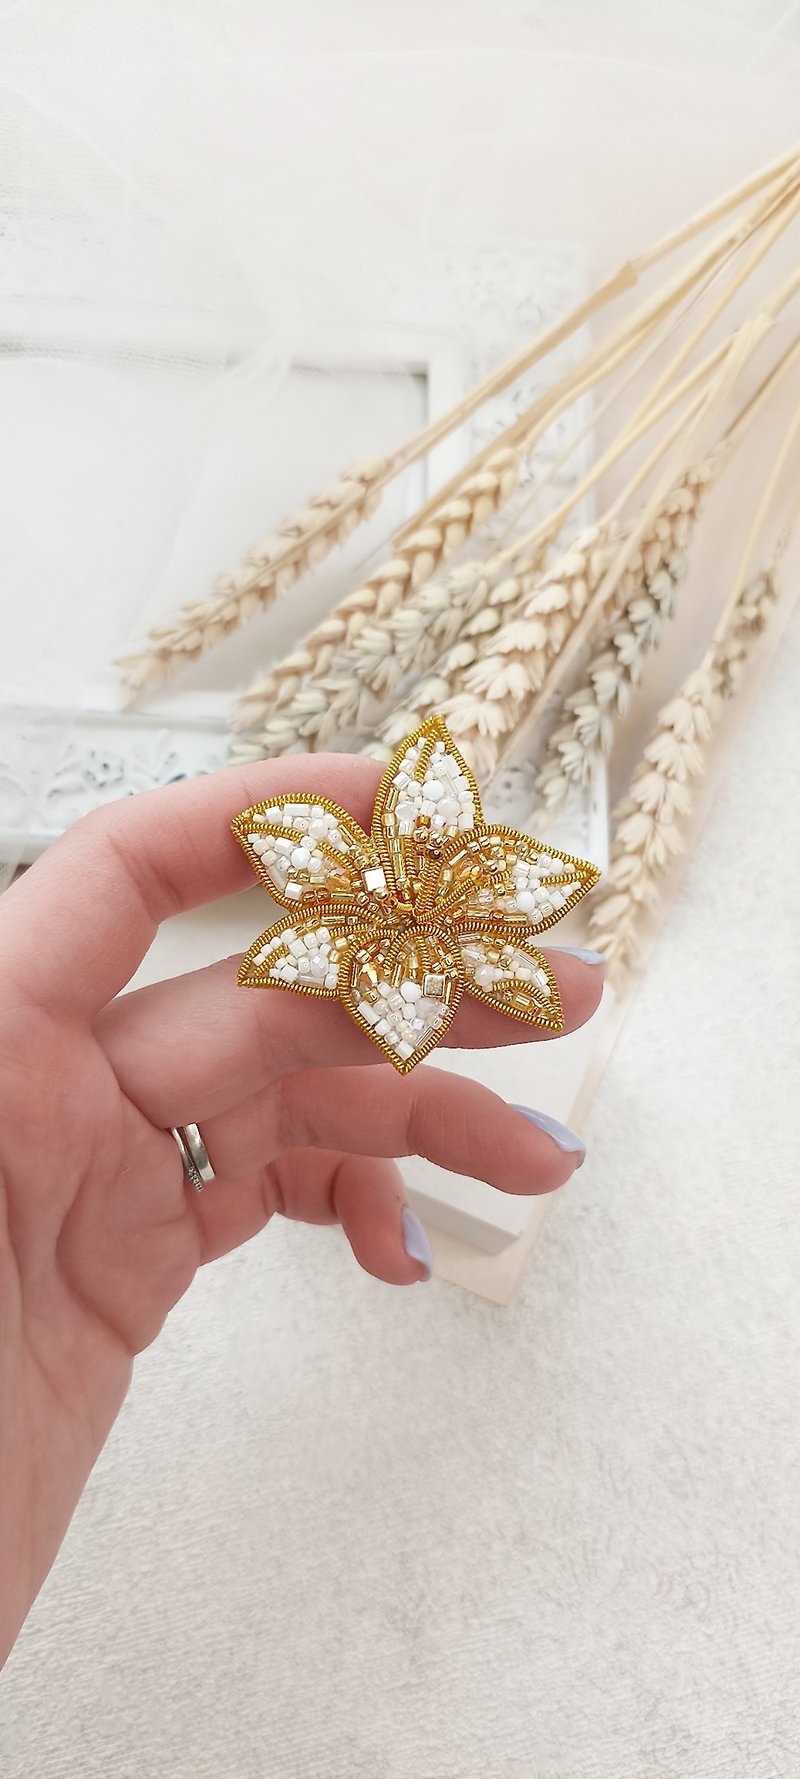 delicate flower pin as a gift, hand-embroidered white and gold flower brooch - เข็มกลัด - สแตนเลส ขาว